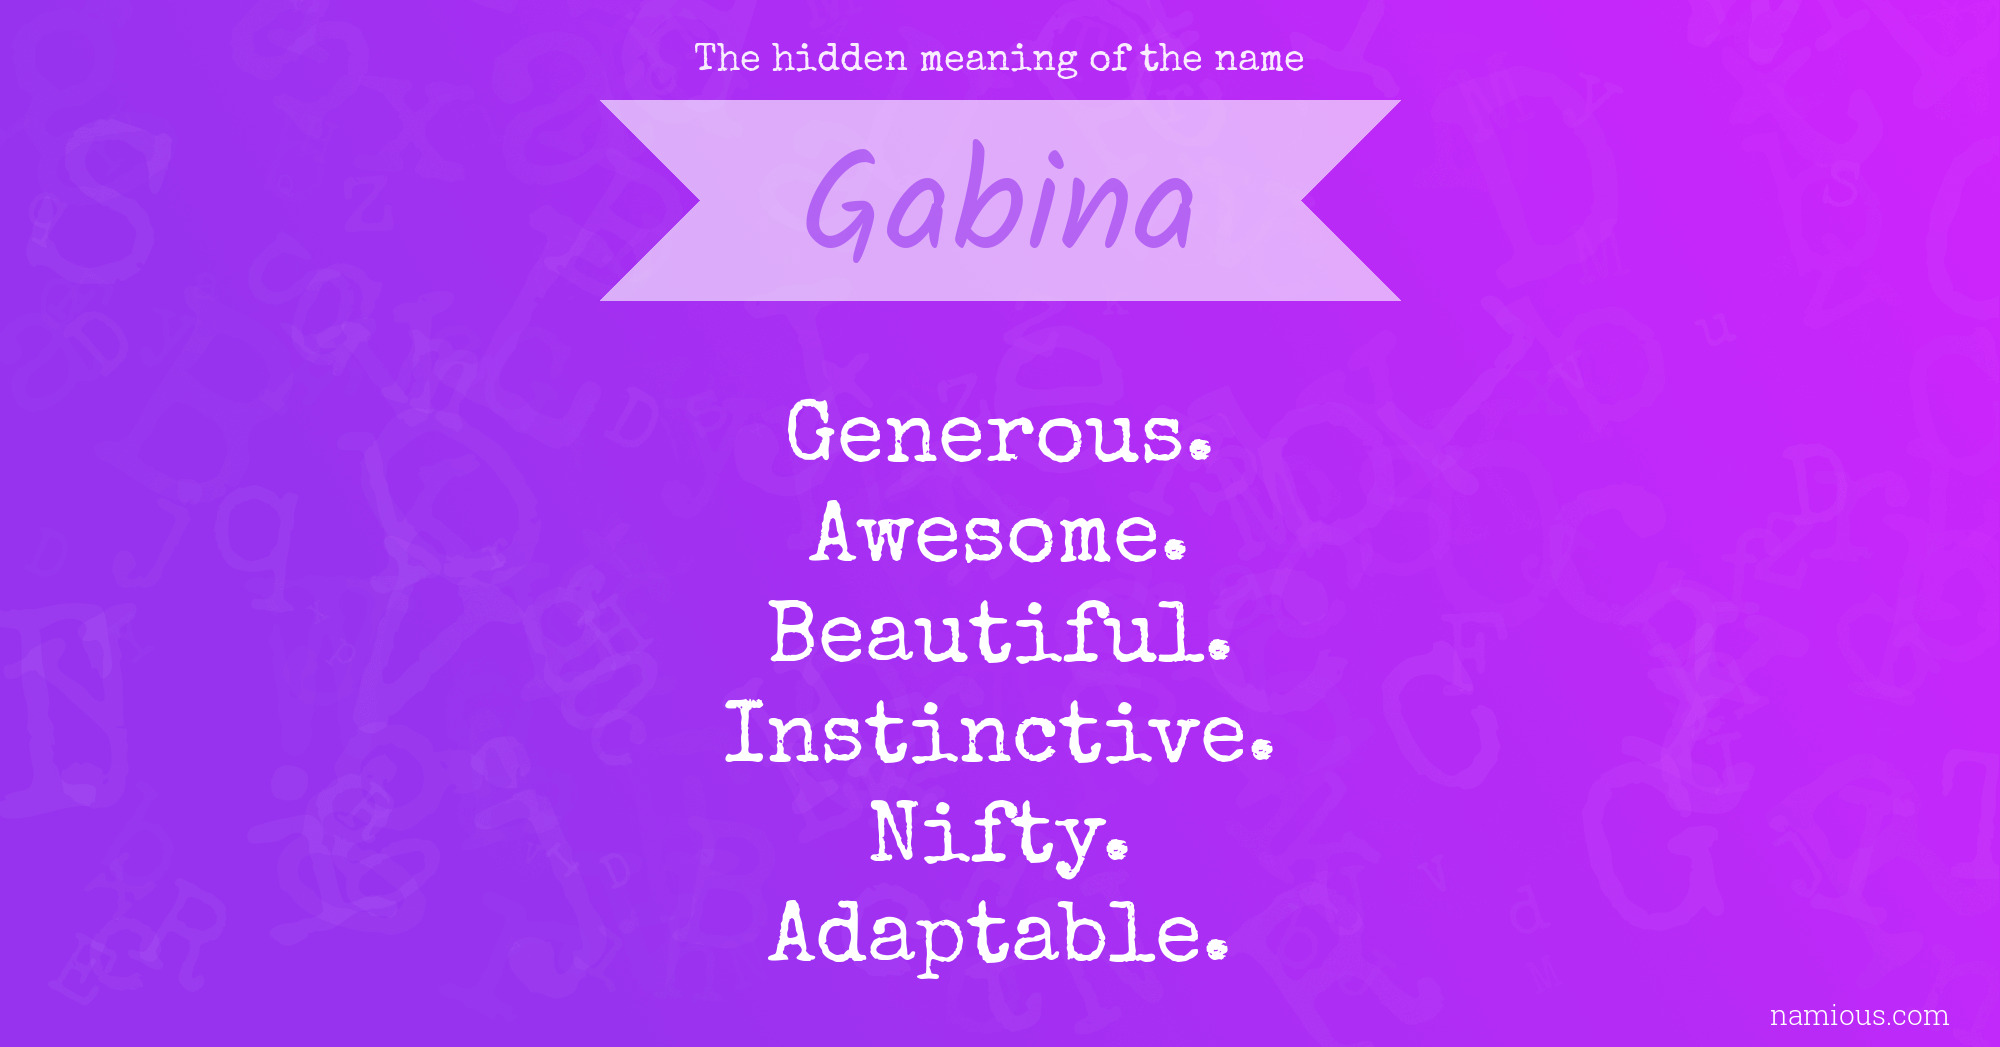 The hidden meaning of the name Gabina